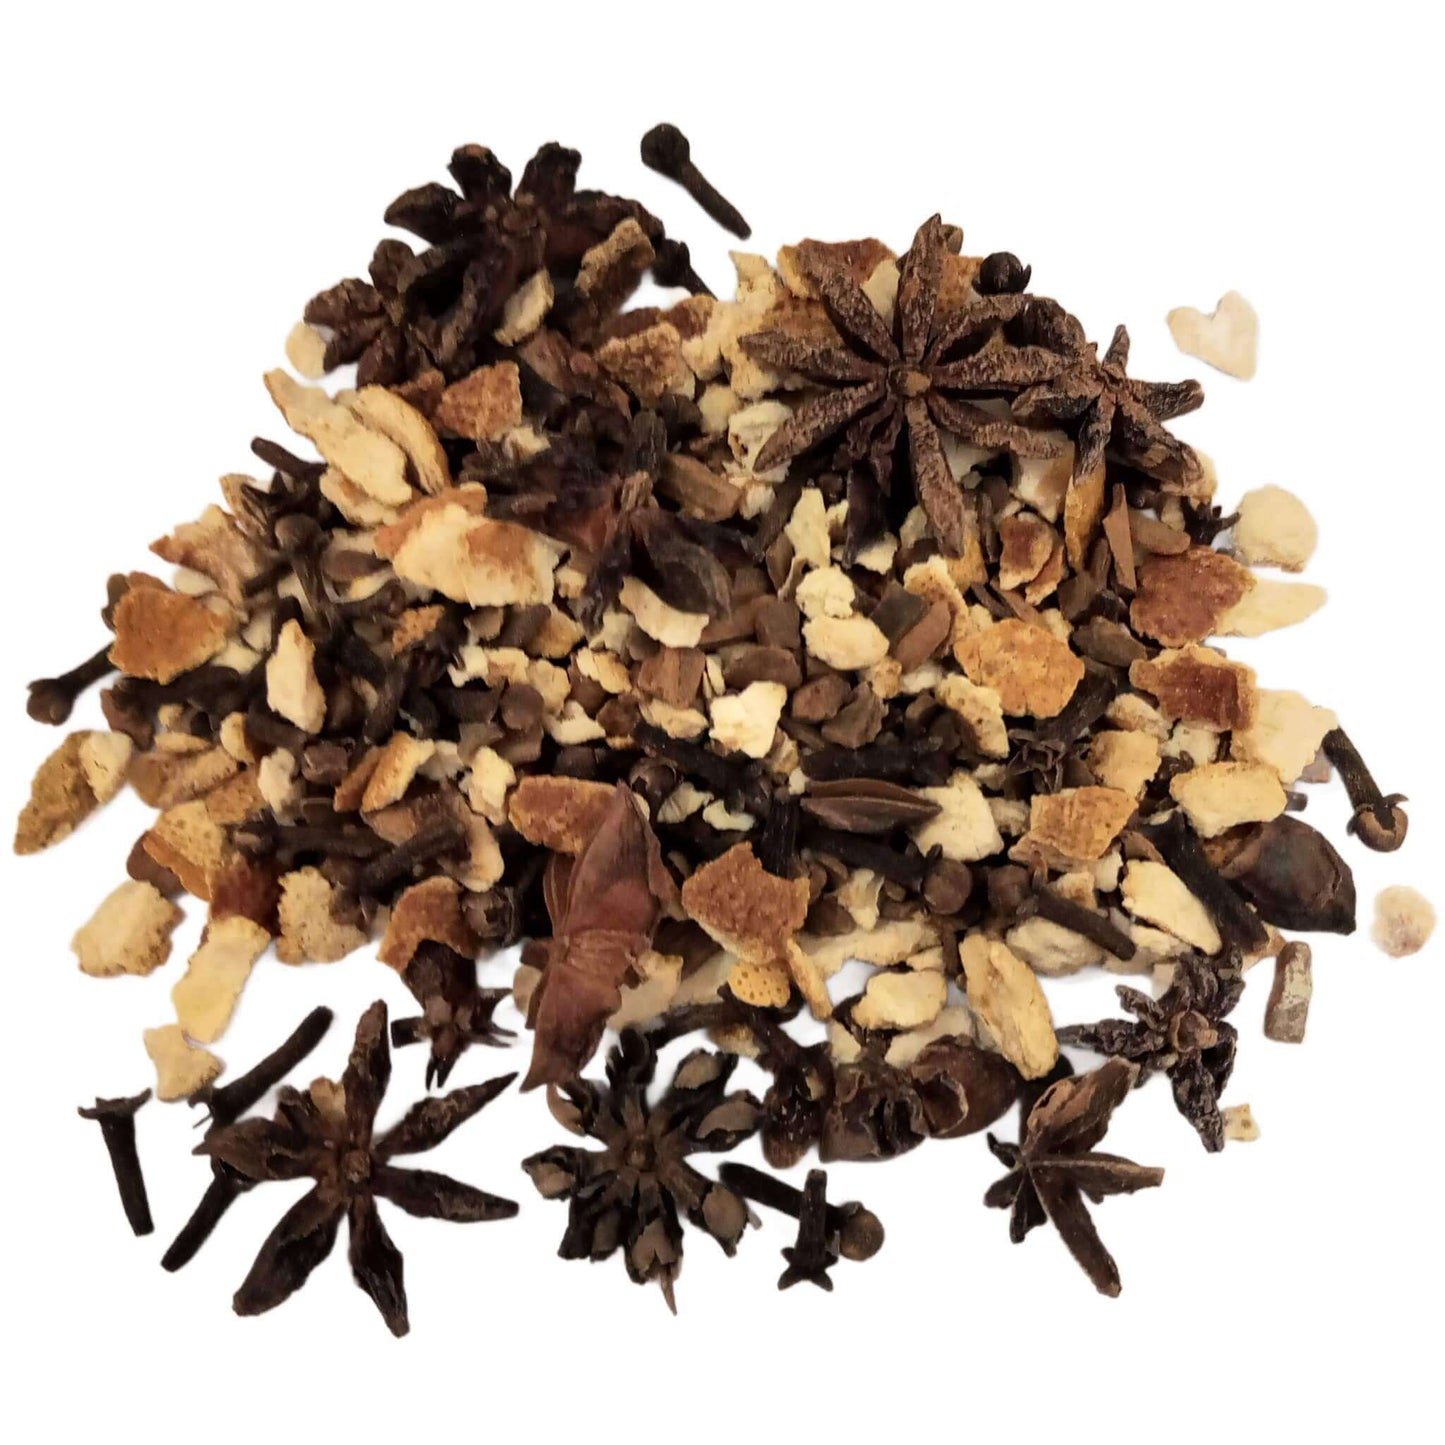 Victorian Kitchen Wildcraft Rustic Simmer Potpourri brings the classic aroma to your home. Experience the charm now!